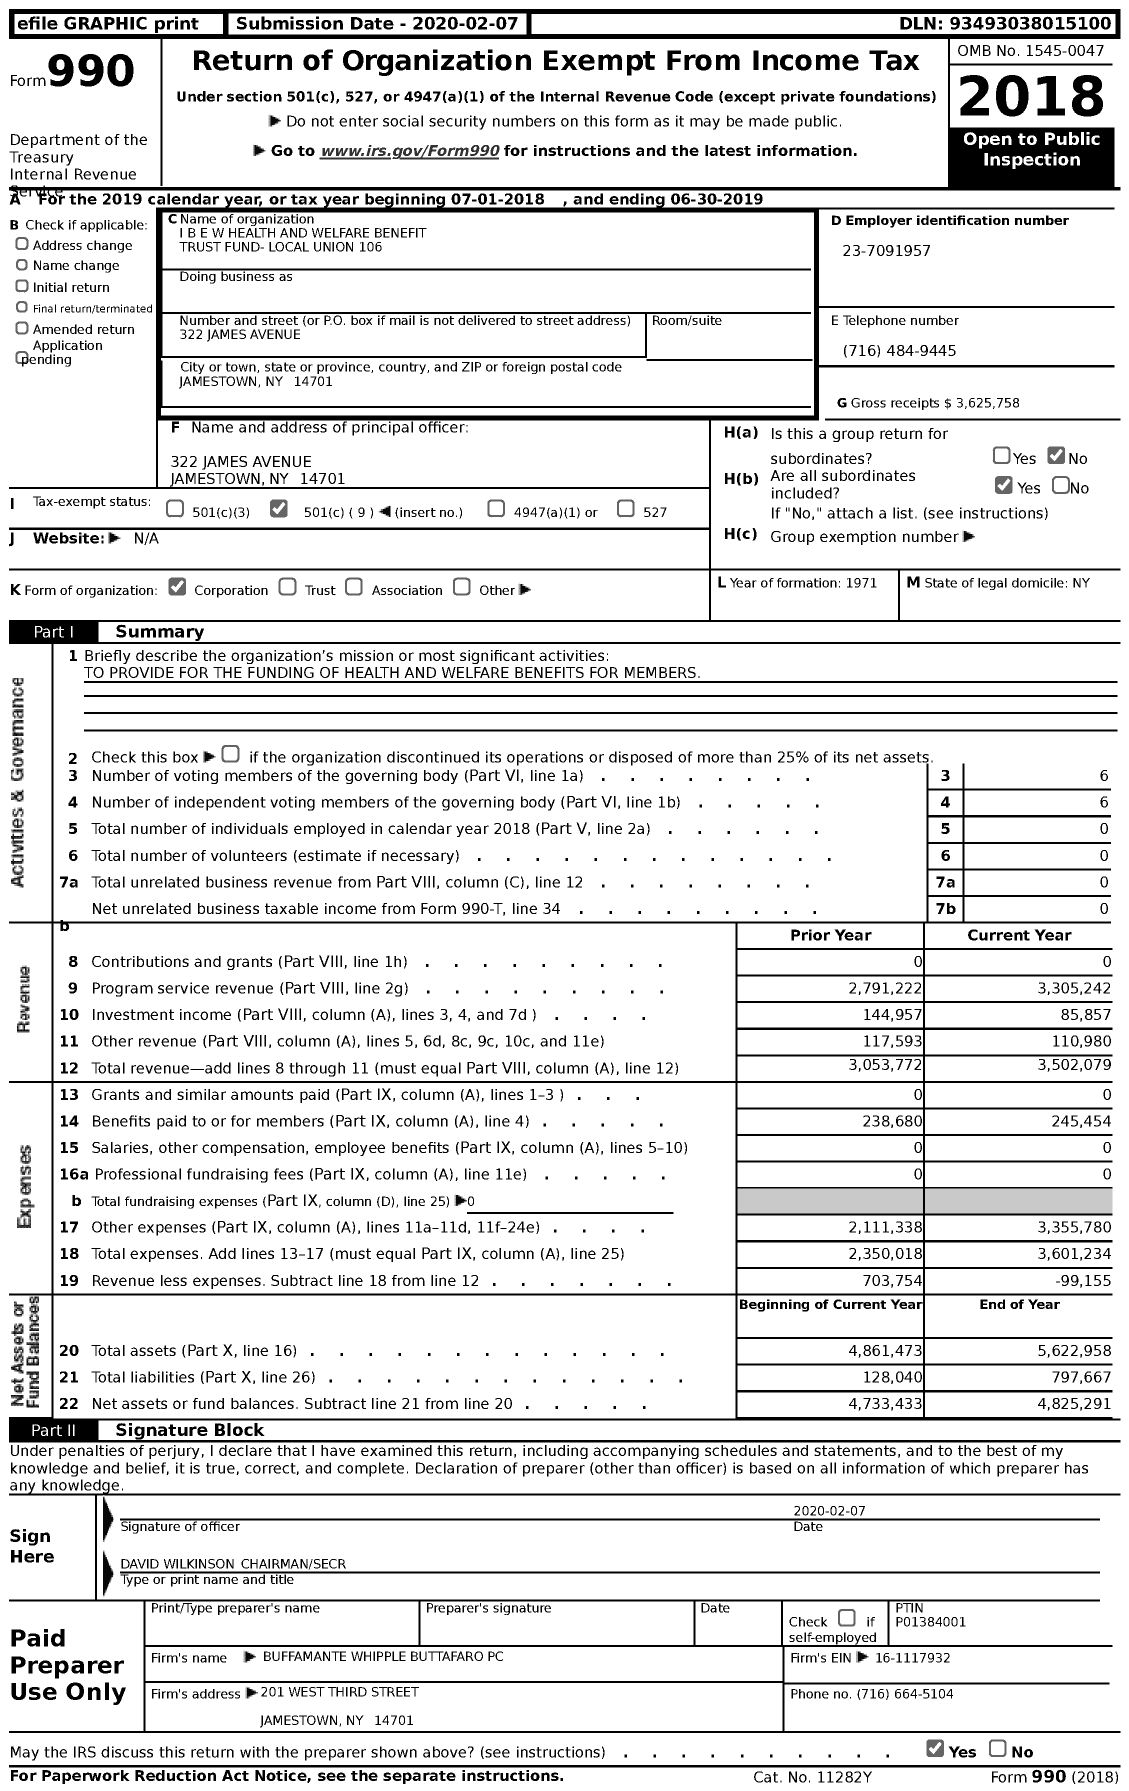 Image of first page of 2018 Form 990 for I B E W Health and Welfare Benefit Trust Fund- Local Union 106